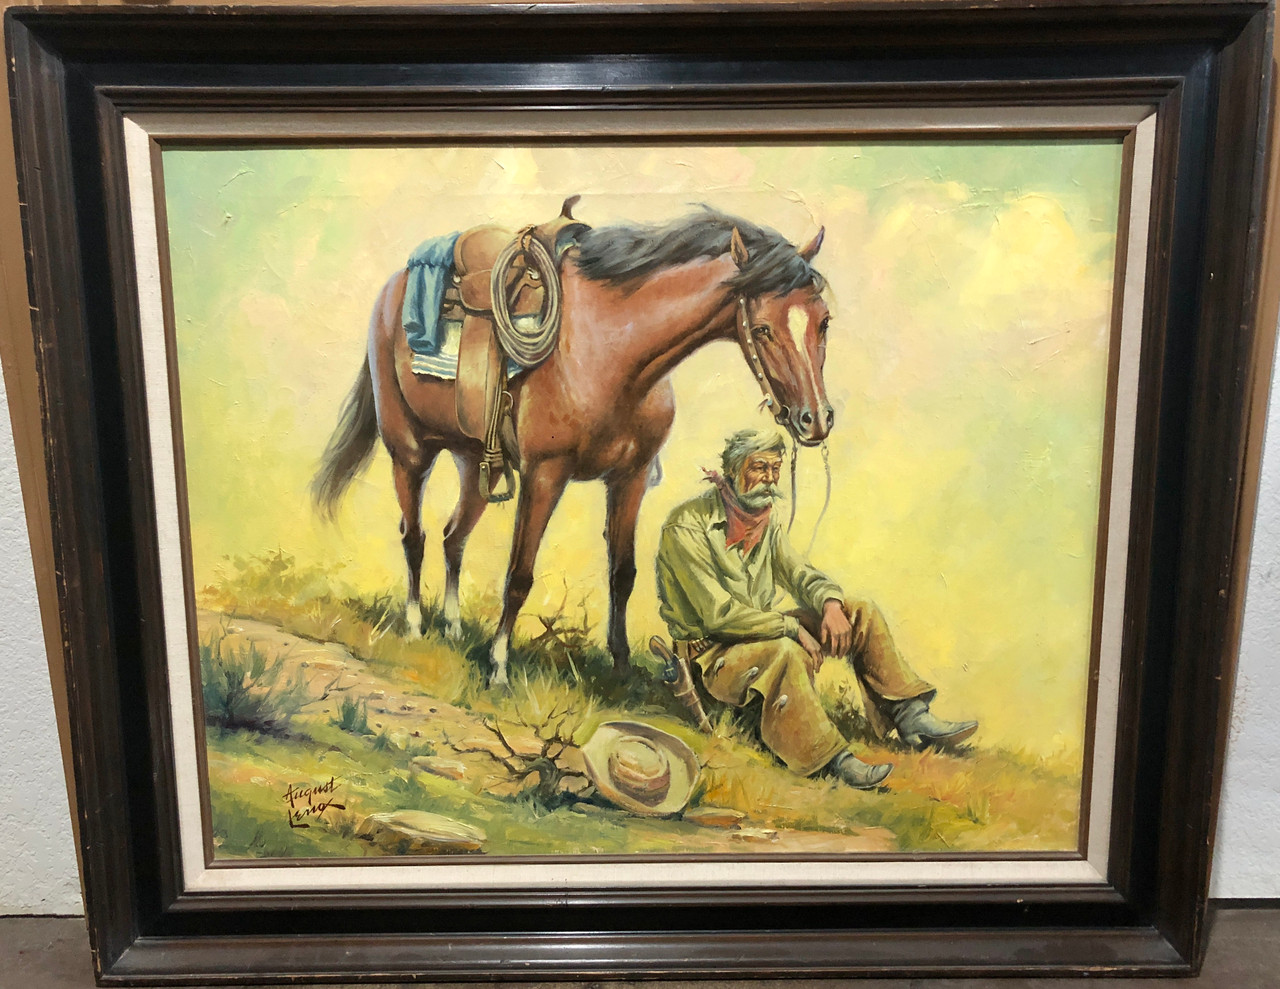 After The Gunsmoke Years By August Lenox - $1,000